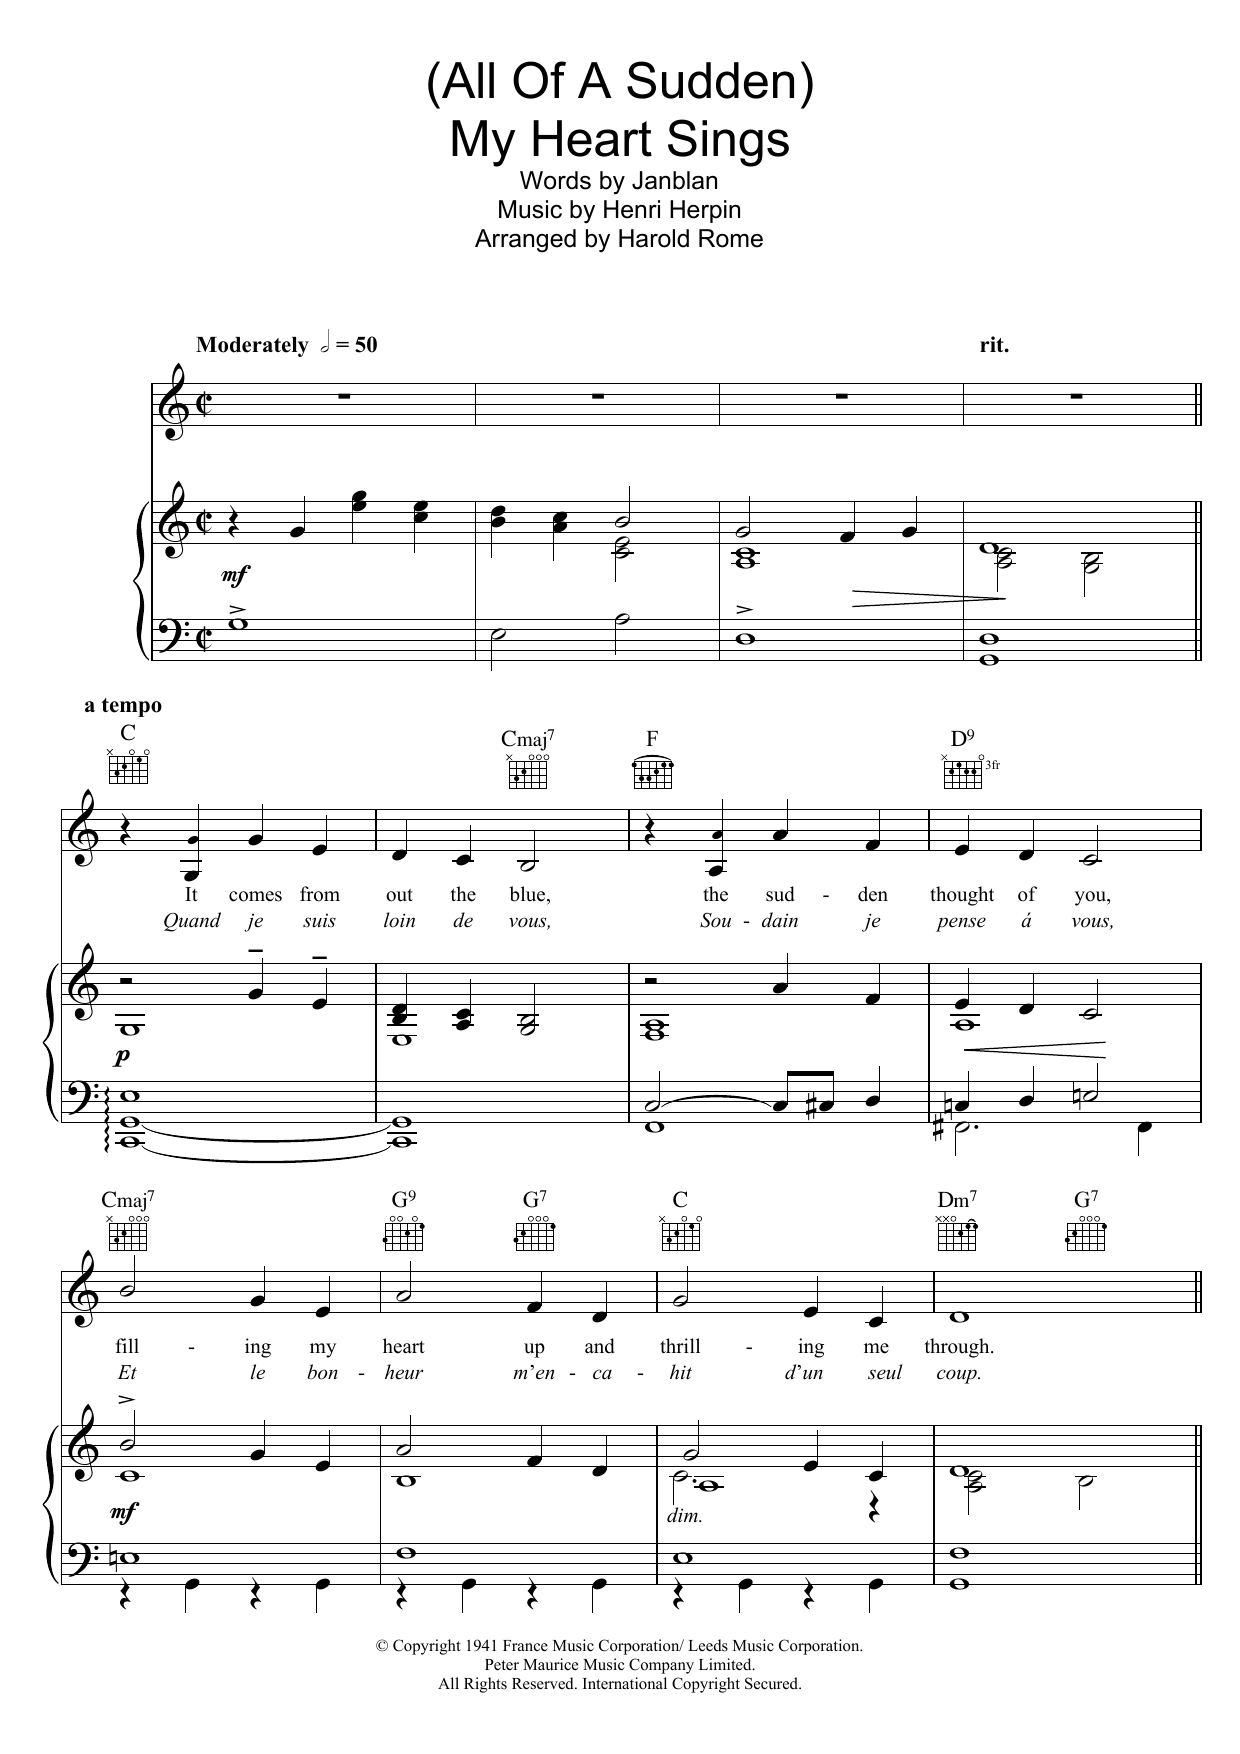 Download Harold Rome (All Of A Sudden) My Heart Sings Sheet Music